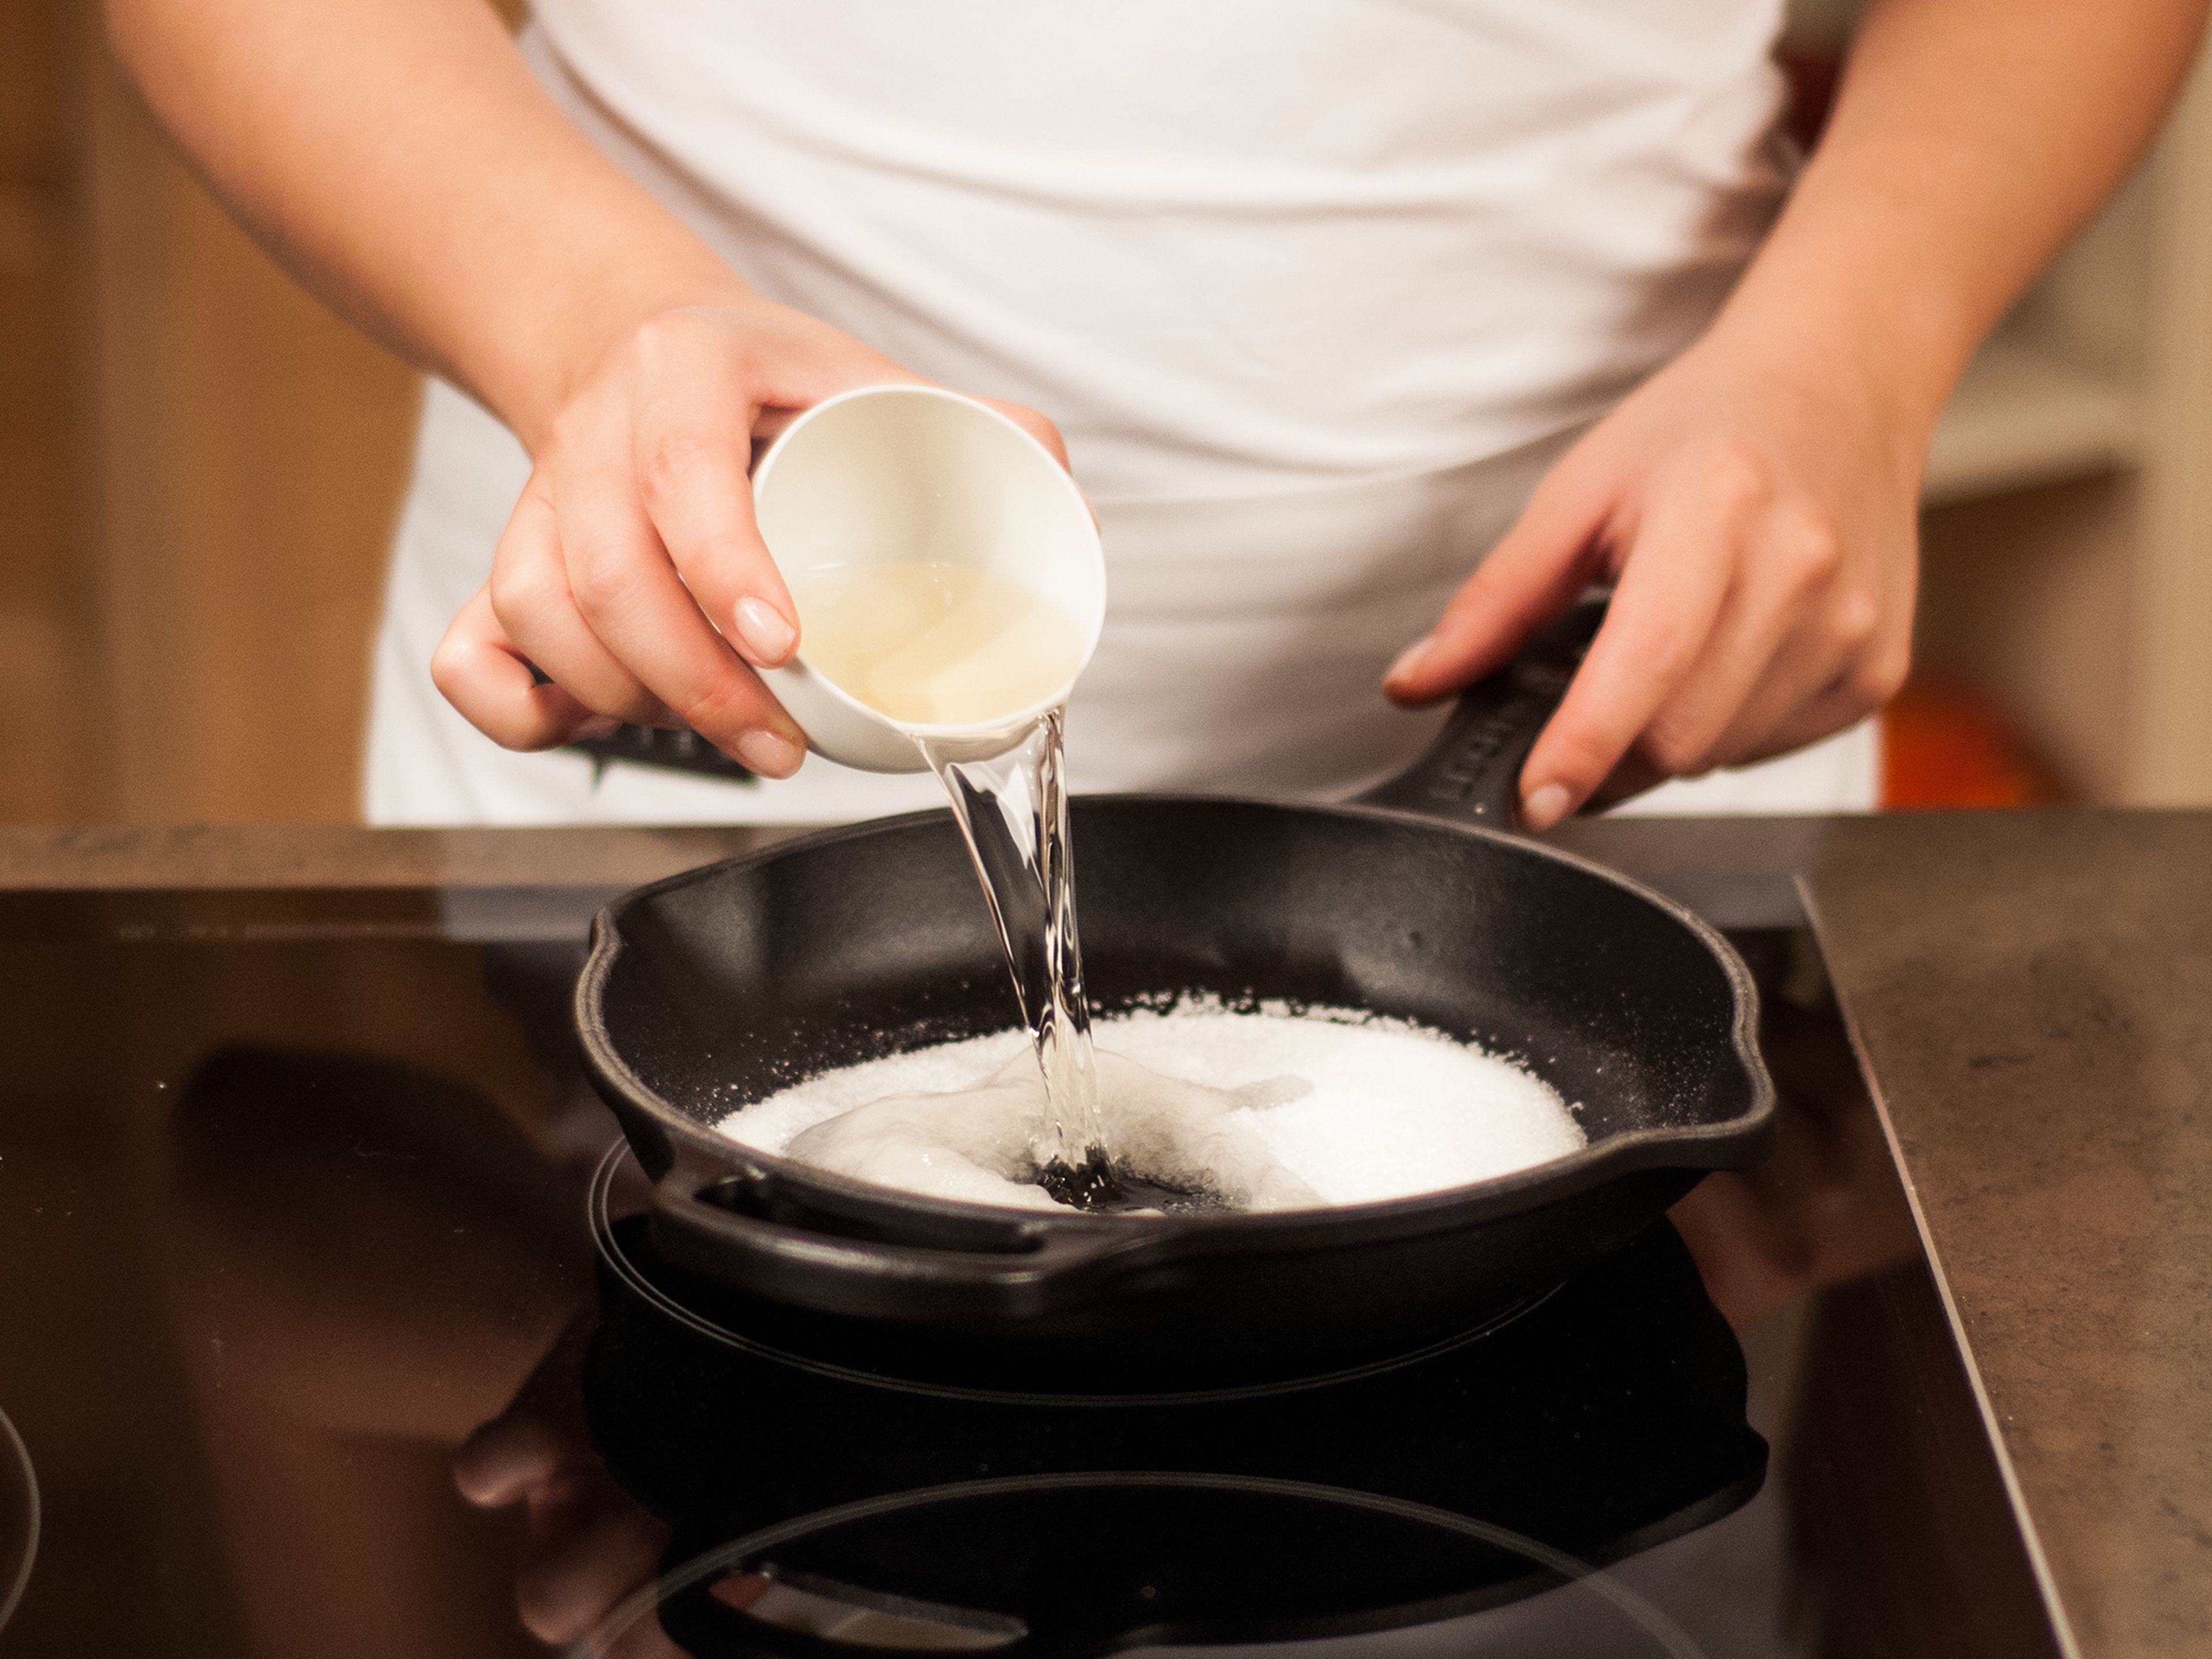 In a frying pan, caramelise sugar over medium-high heat for approx. 1 – 2 min. and deglaze with white wine.